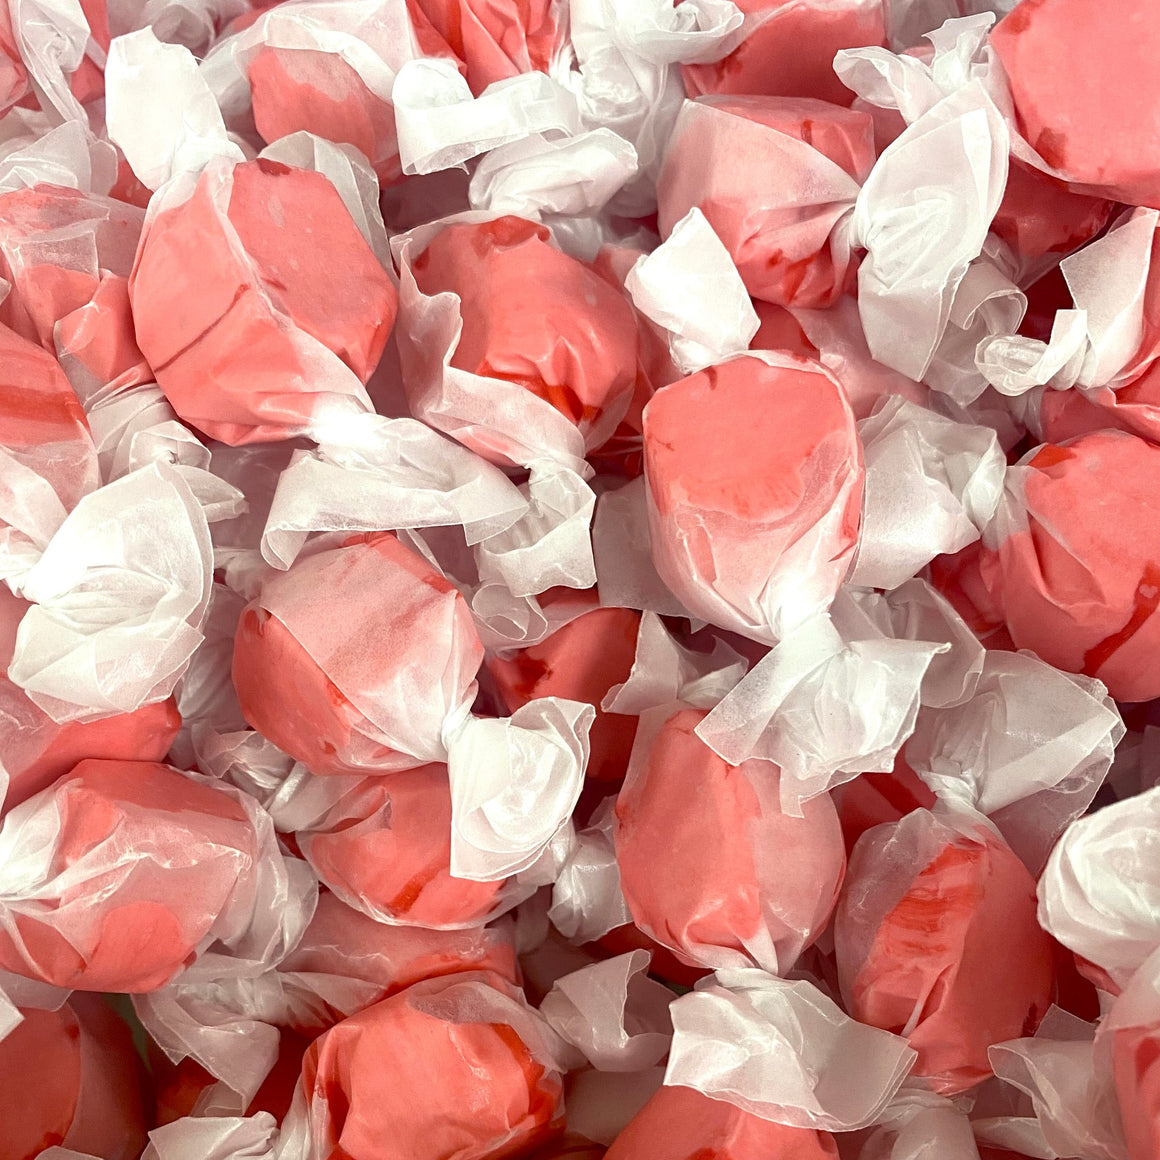 Cinnamon Salt Water Taffy. For fresh candy and great service, visit www.allcitycandy.com